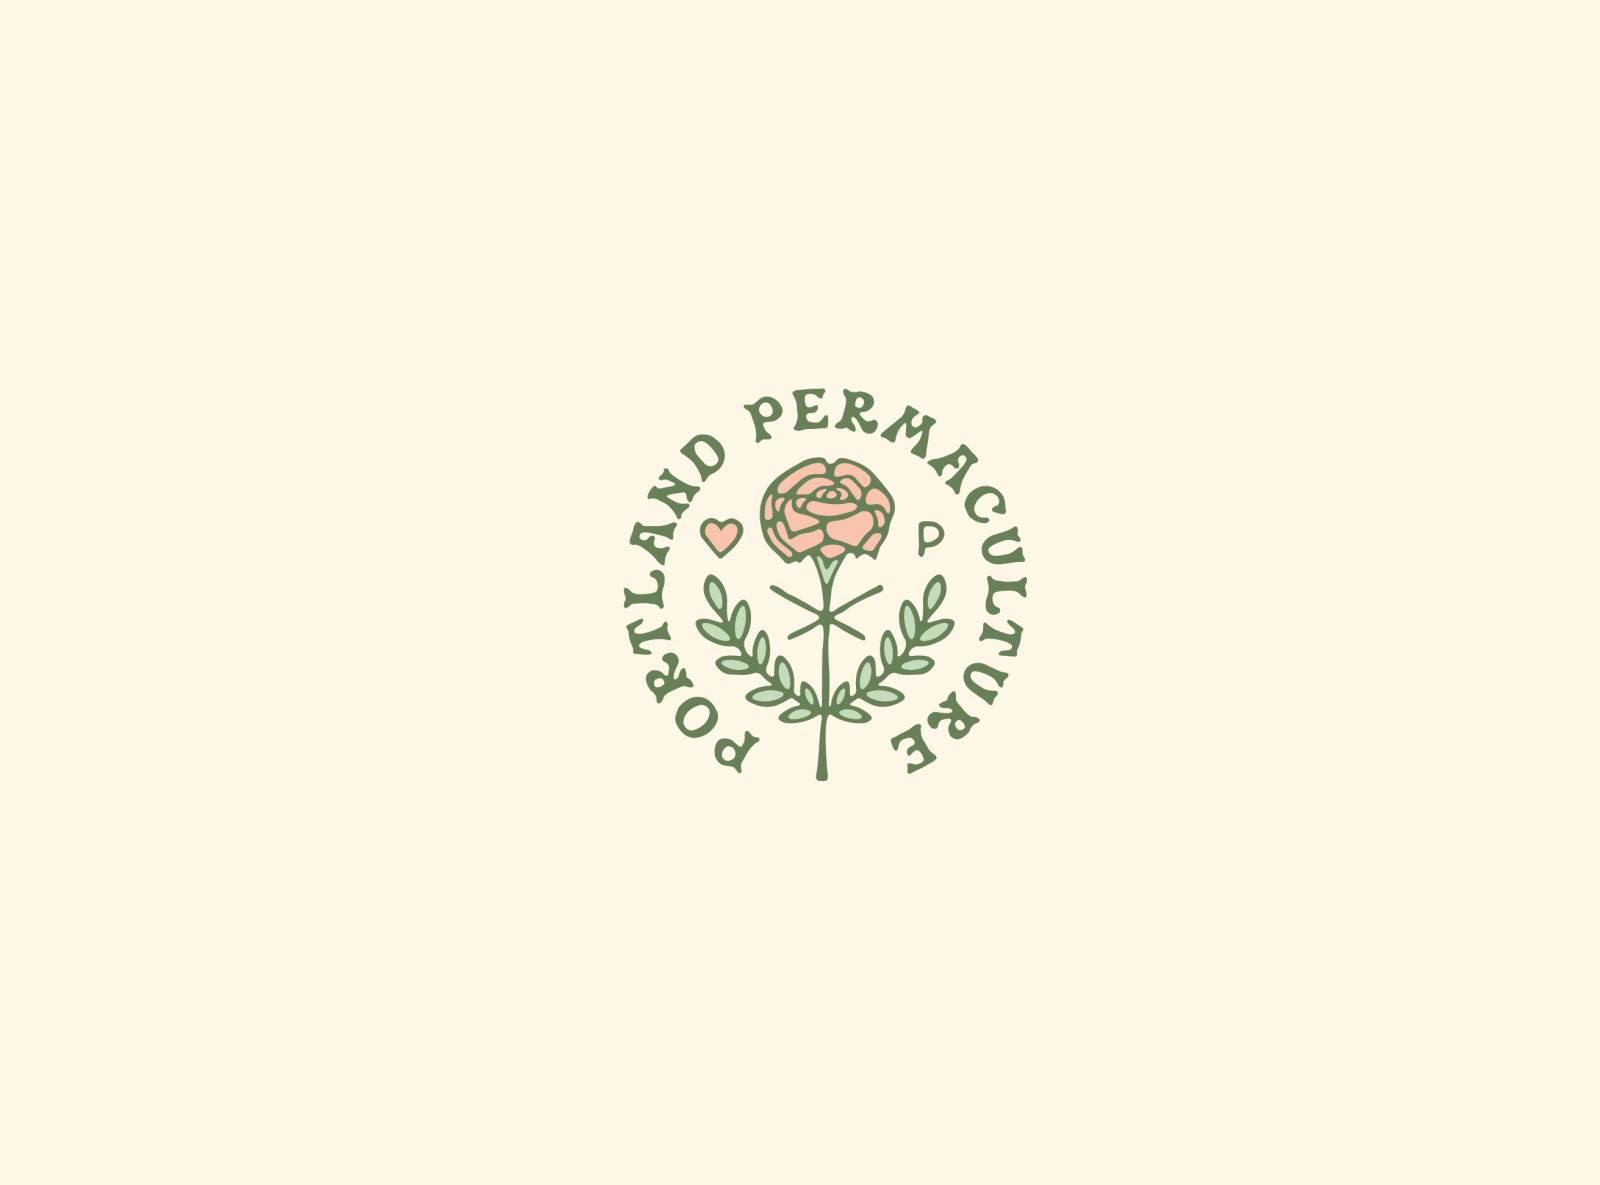 Portland Permaculture flowers fonts garden hand-drawn illustration natural nature organic outdoors pacific permaculture type west coast